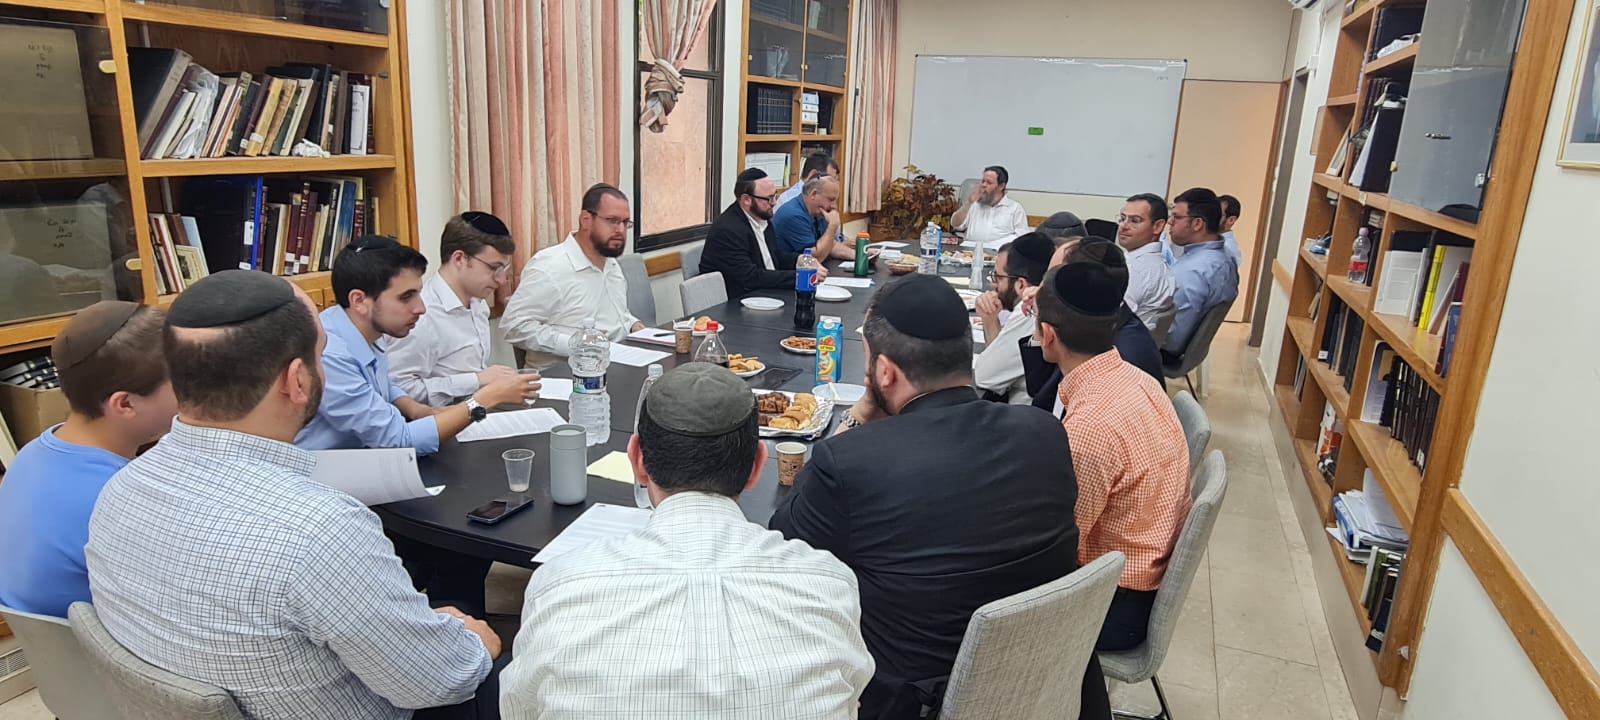 On Sunday we were excited to welcome back overseas alumni to campus, for a special day of learning. The bogrim heard shiurim from Rosh Hayeshiva Rav Aharon Friedman and from Rav Blachman, in addition to having morning Seder in the Beit Midrash.